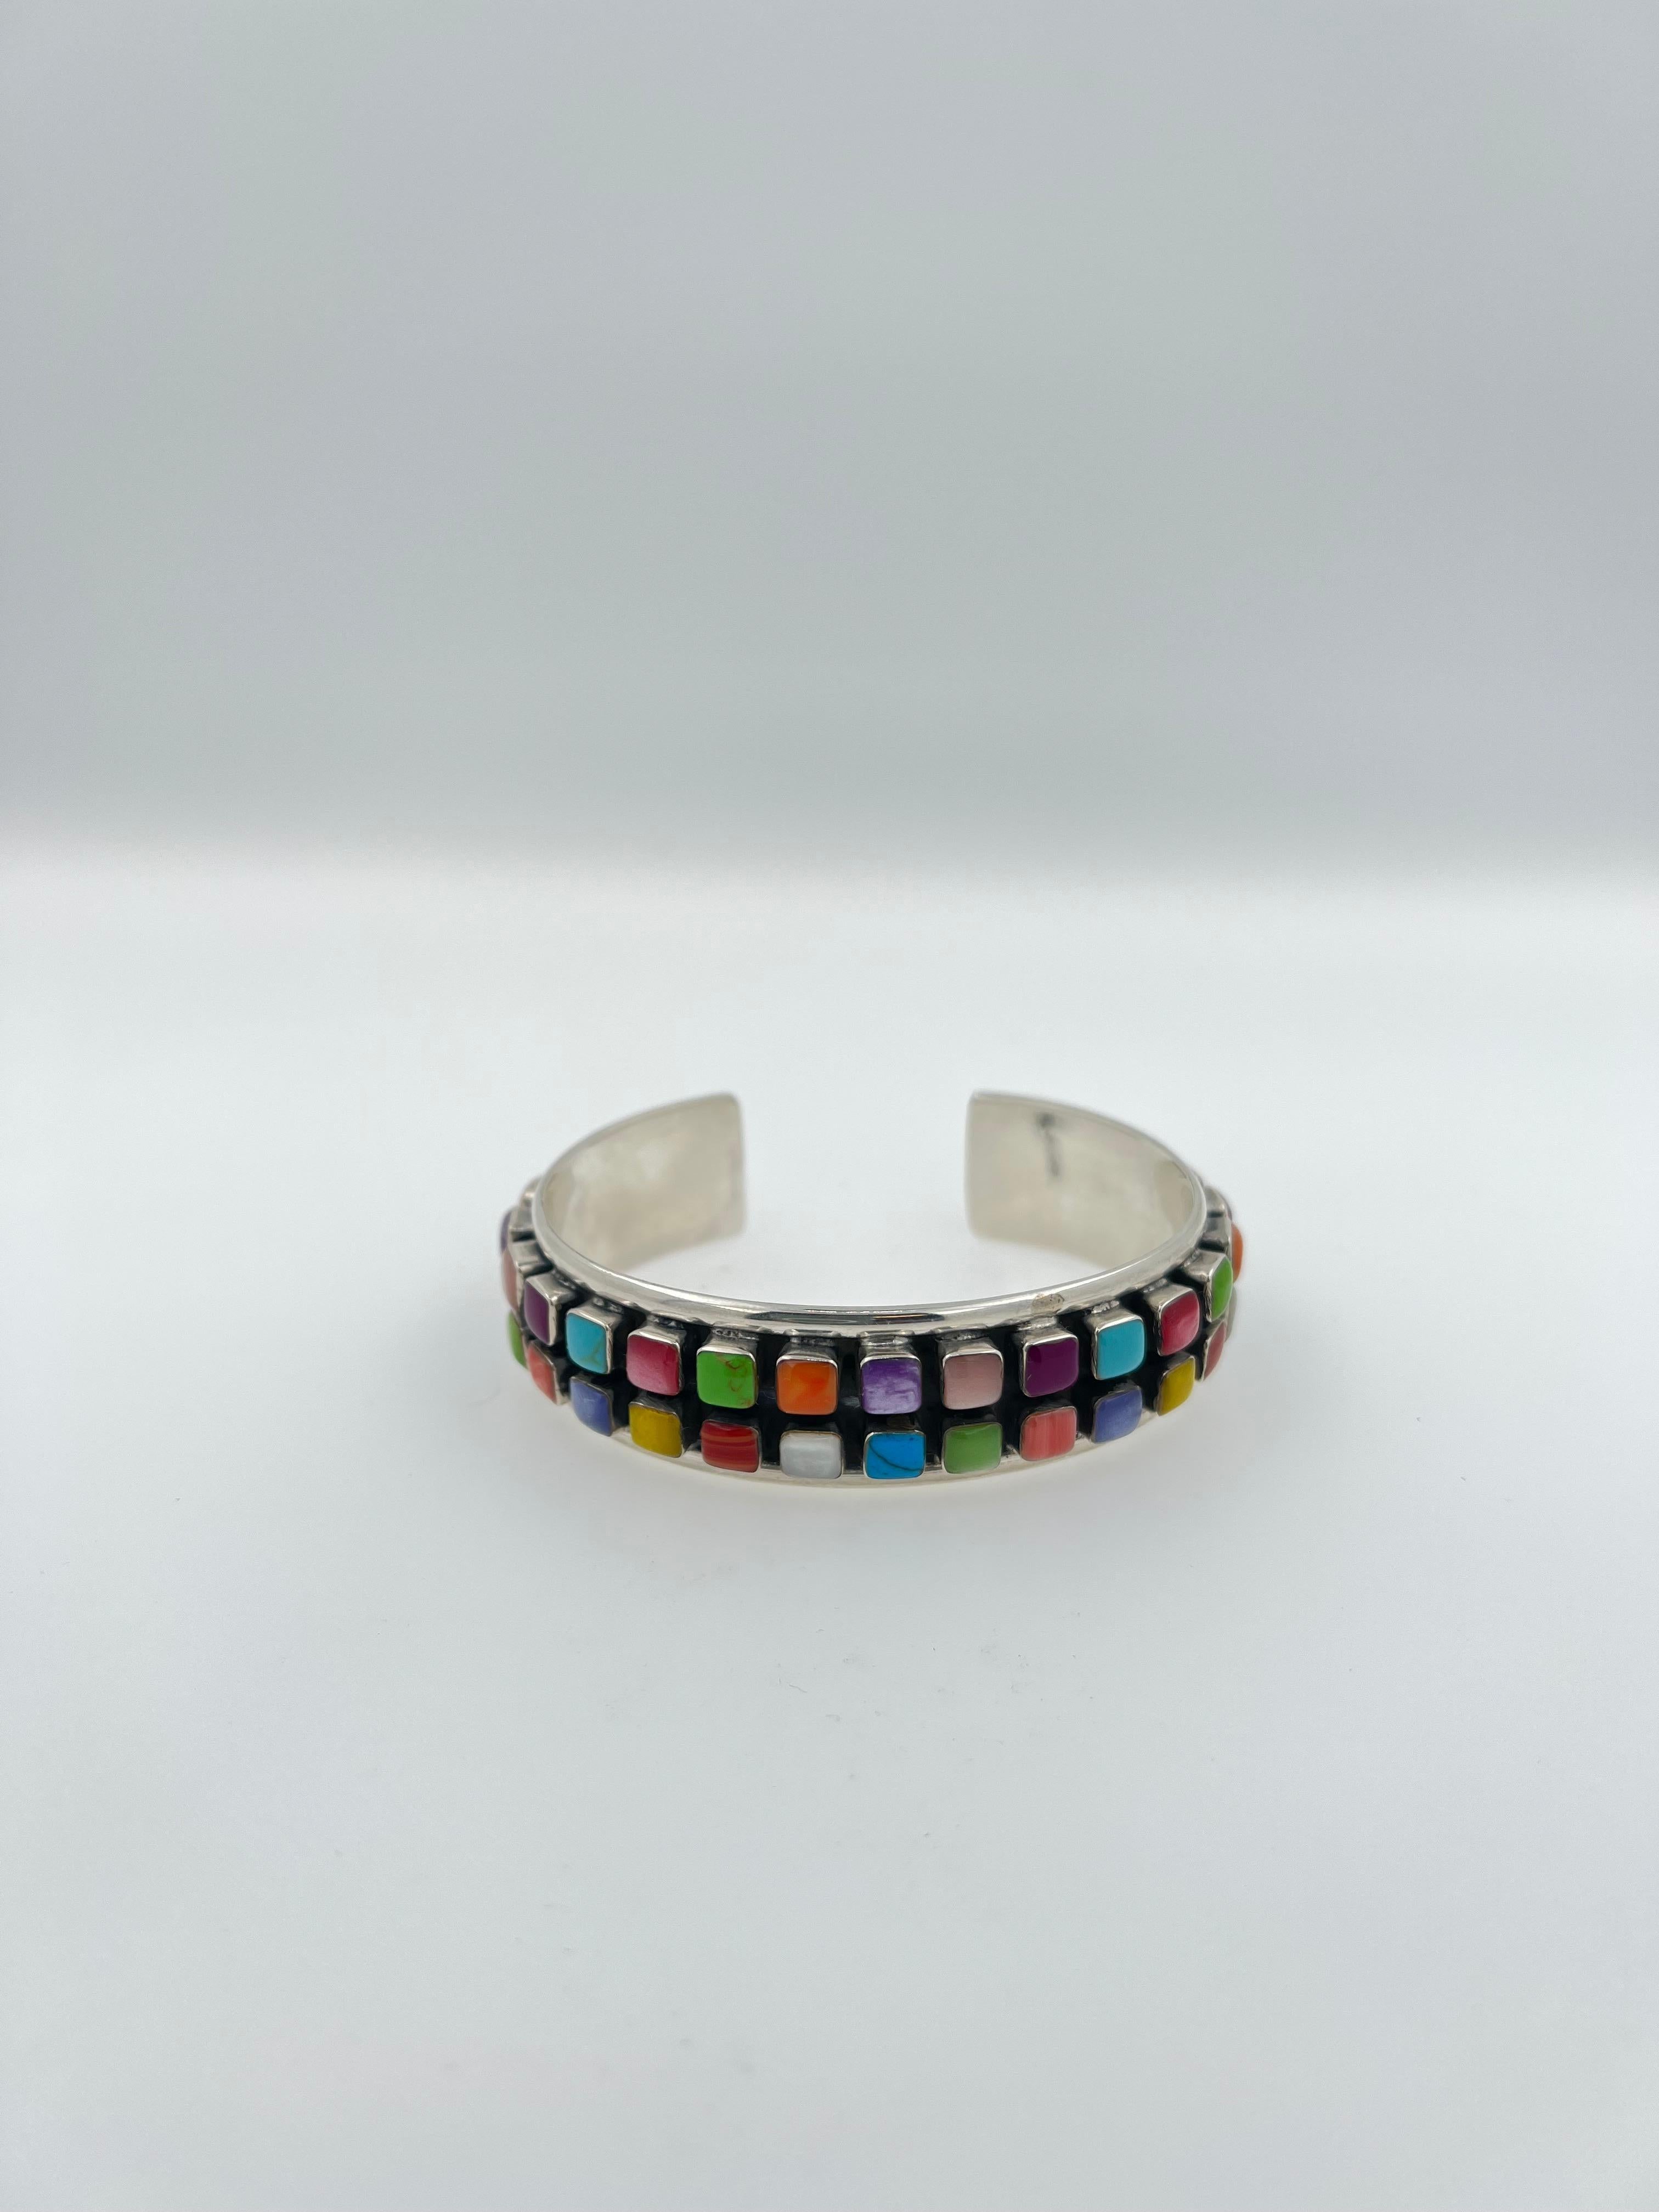 Geometric Colored Rainbow Cab Gemstone Sterling Silver Wide Cuff Bangle Bracelet For Sale 7